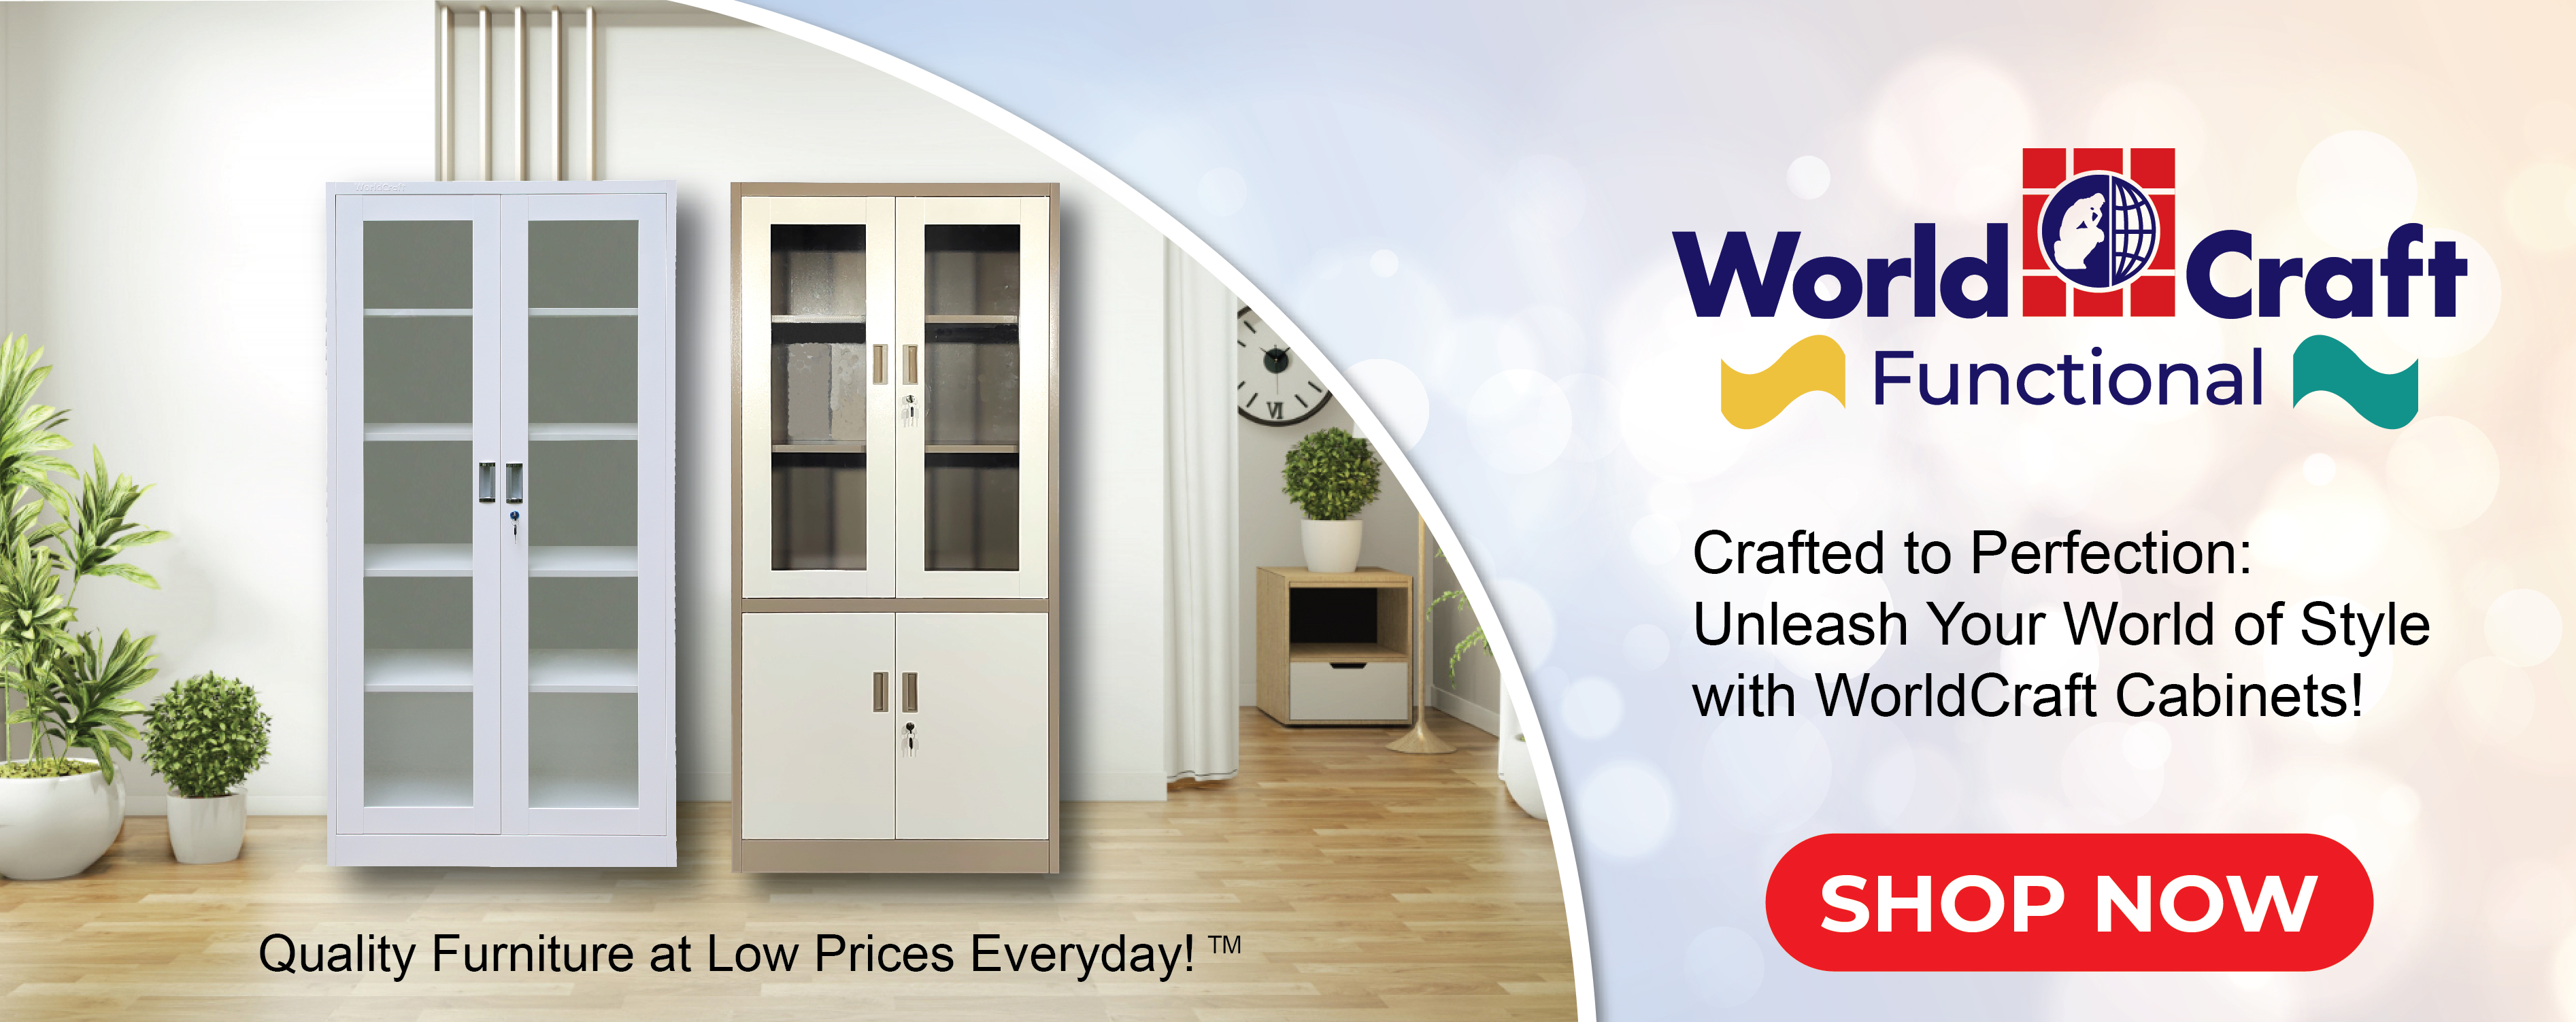 WorldCraft Furniture  Quality Furniture at Low Prices Everyday!